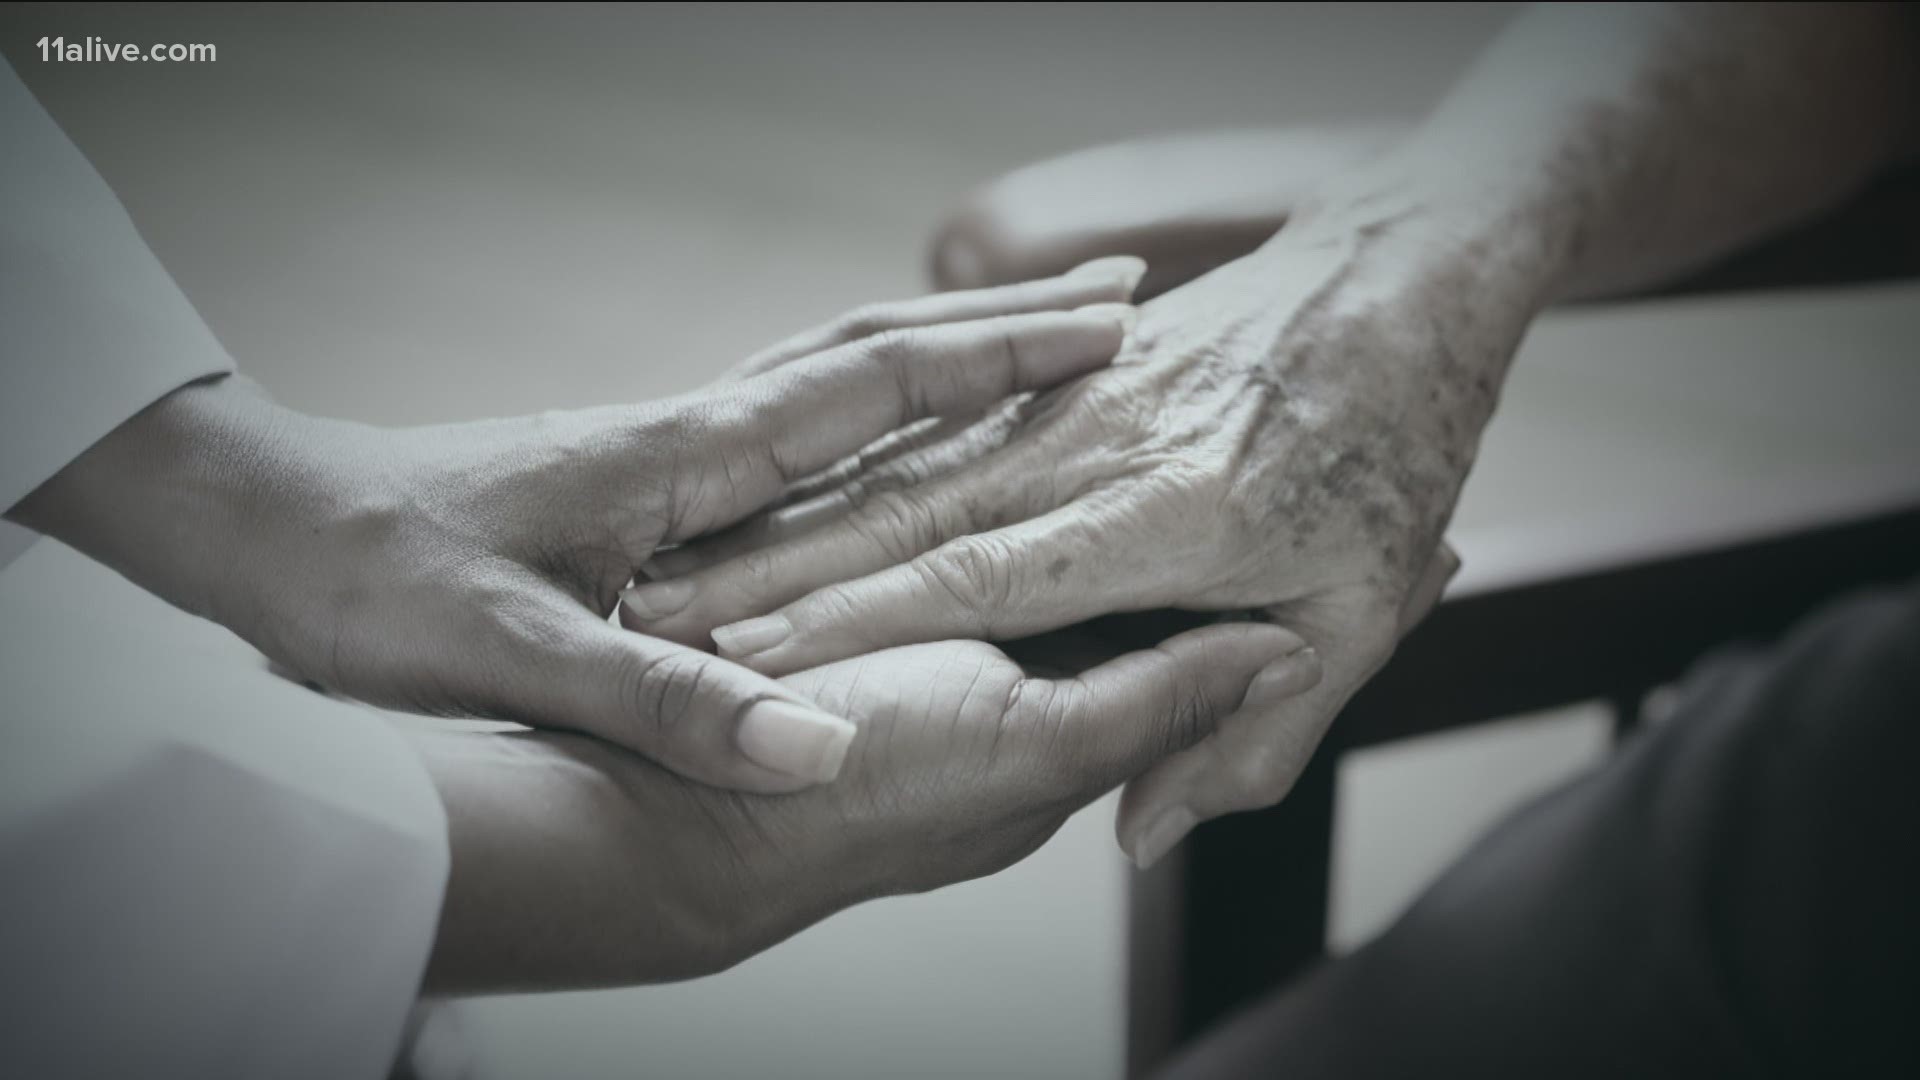 The role of a caregiver extends beyond just caring.